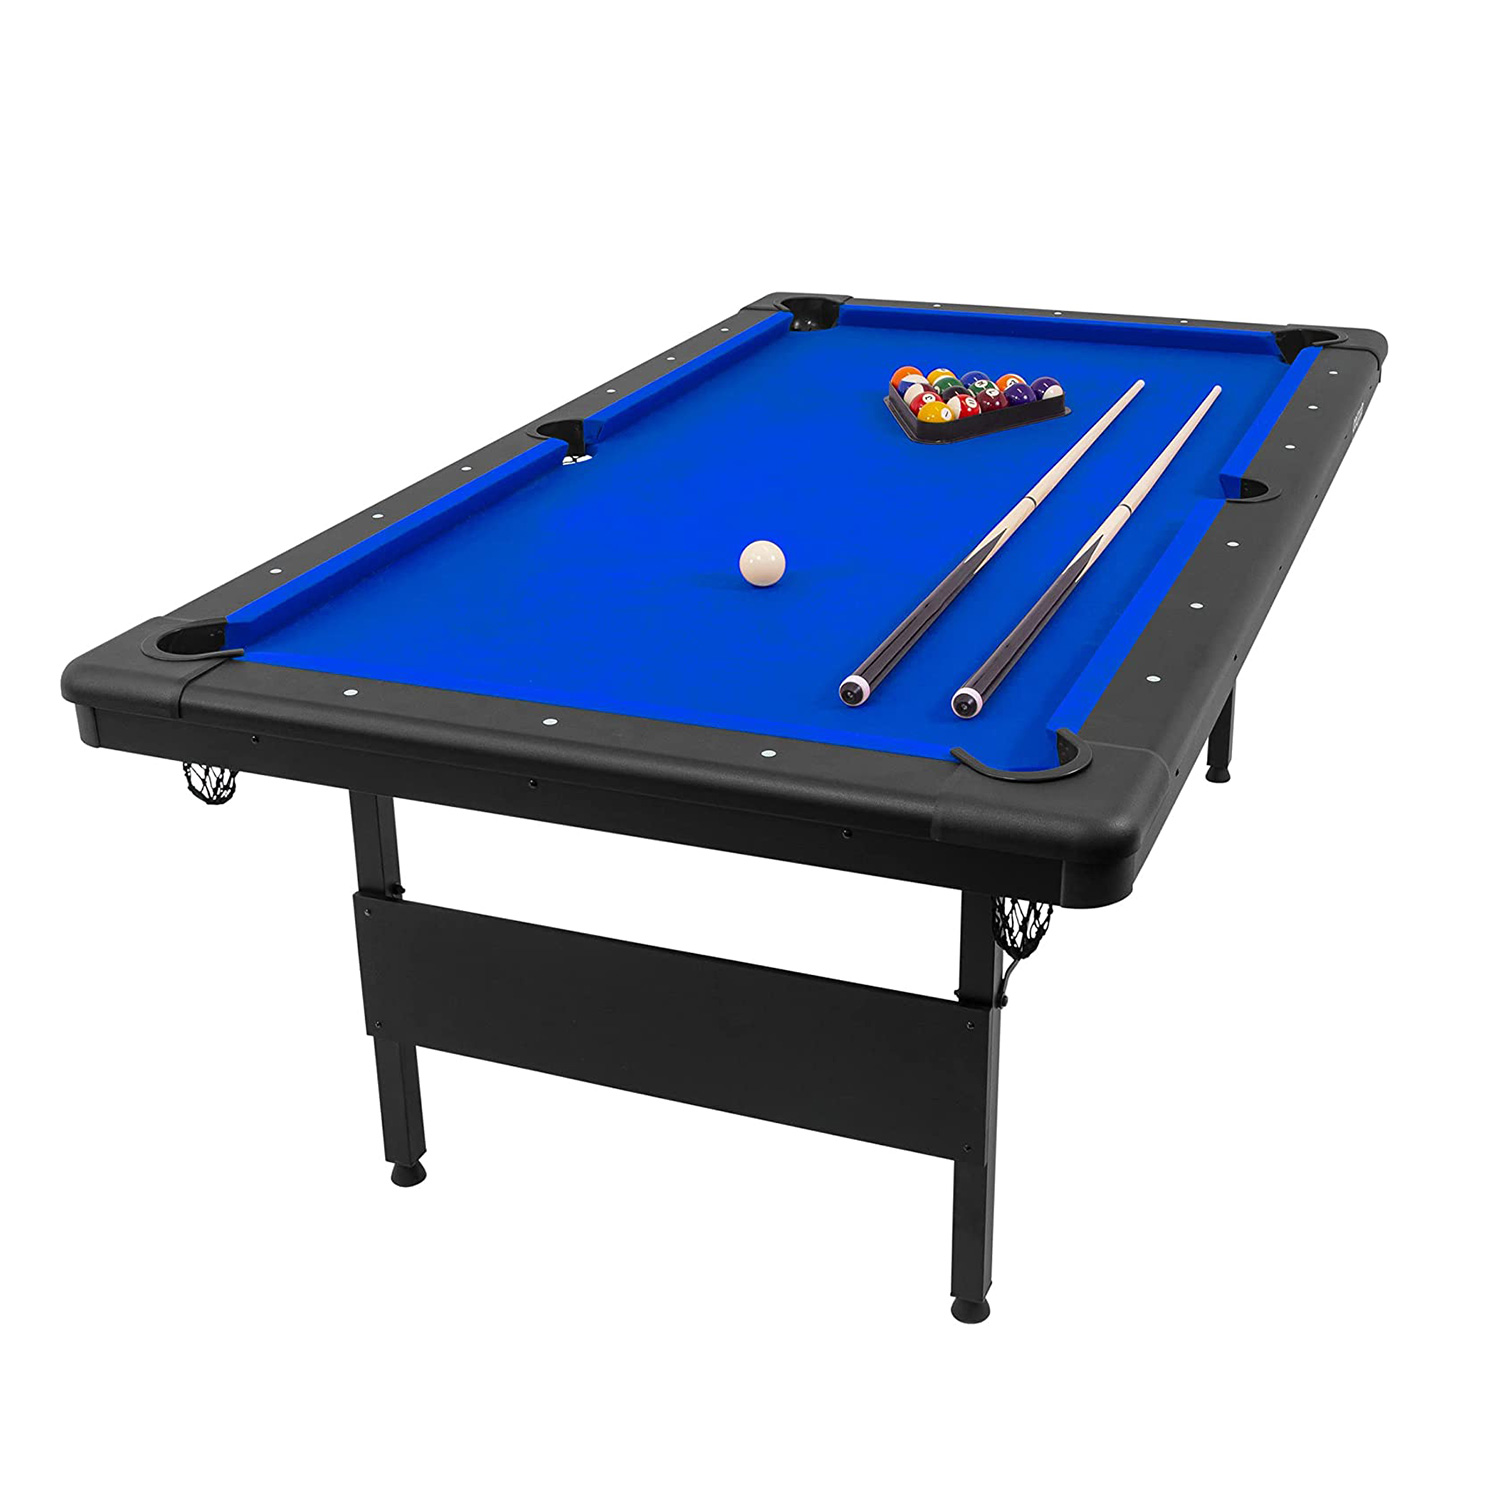 GoSports 7ft Billiards Table – Portable Pool Table – Includes Full Set of Balls, 2 Cue Sticks, Chalk, and Felt Brush